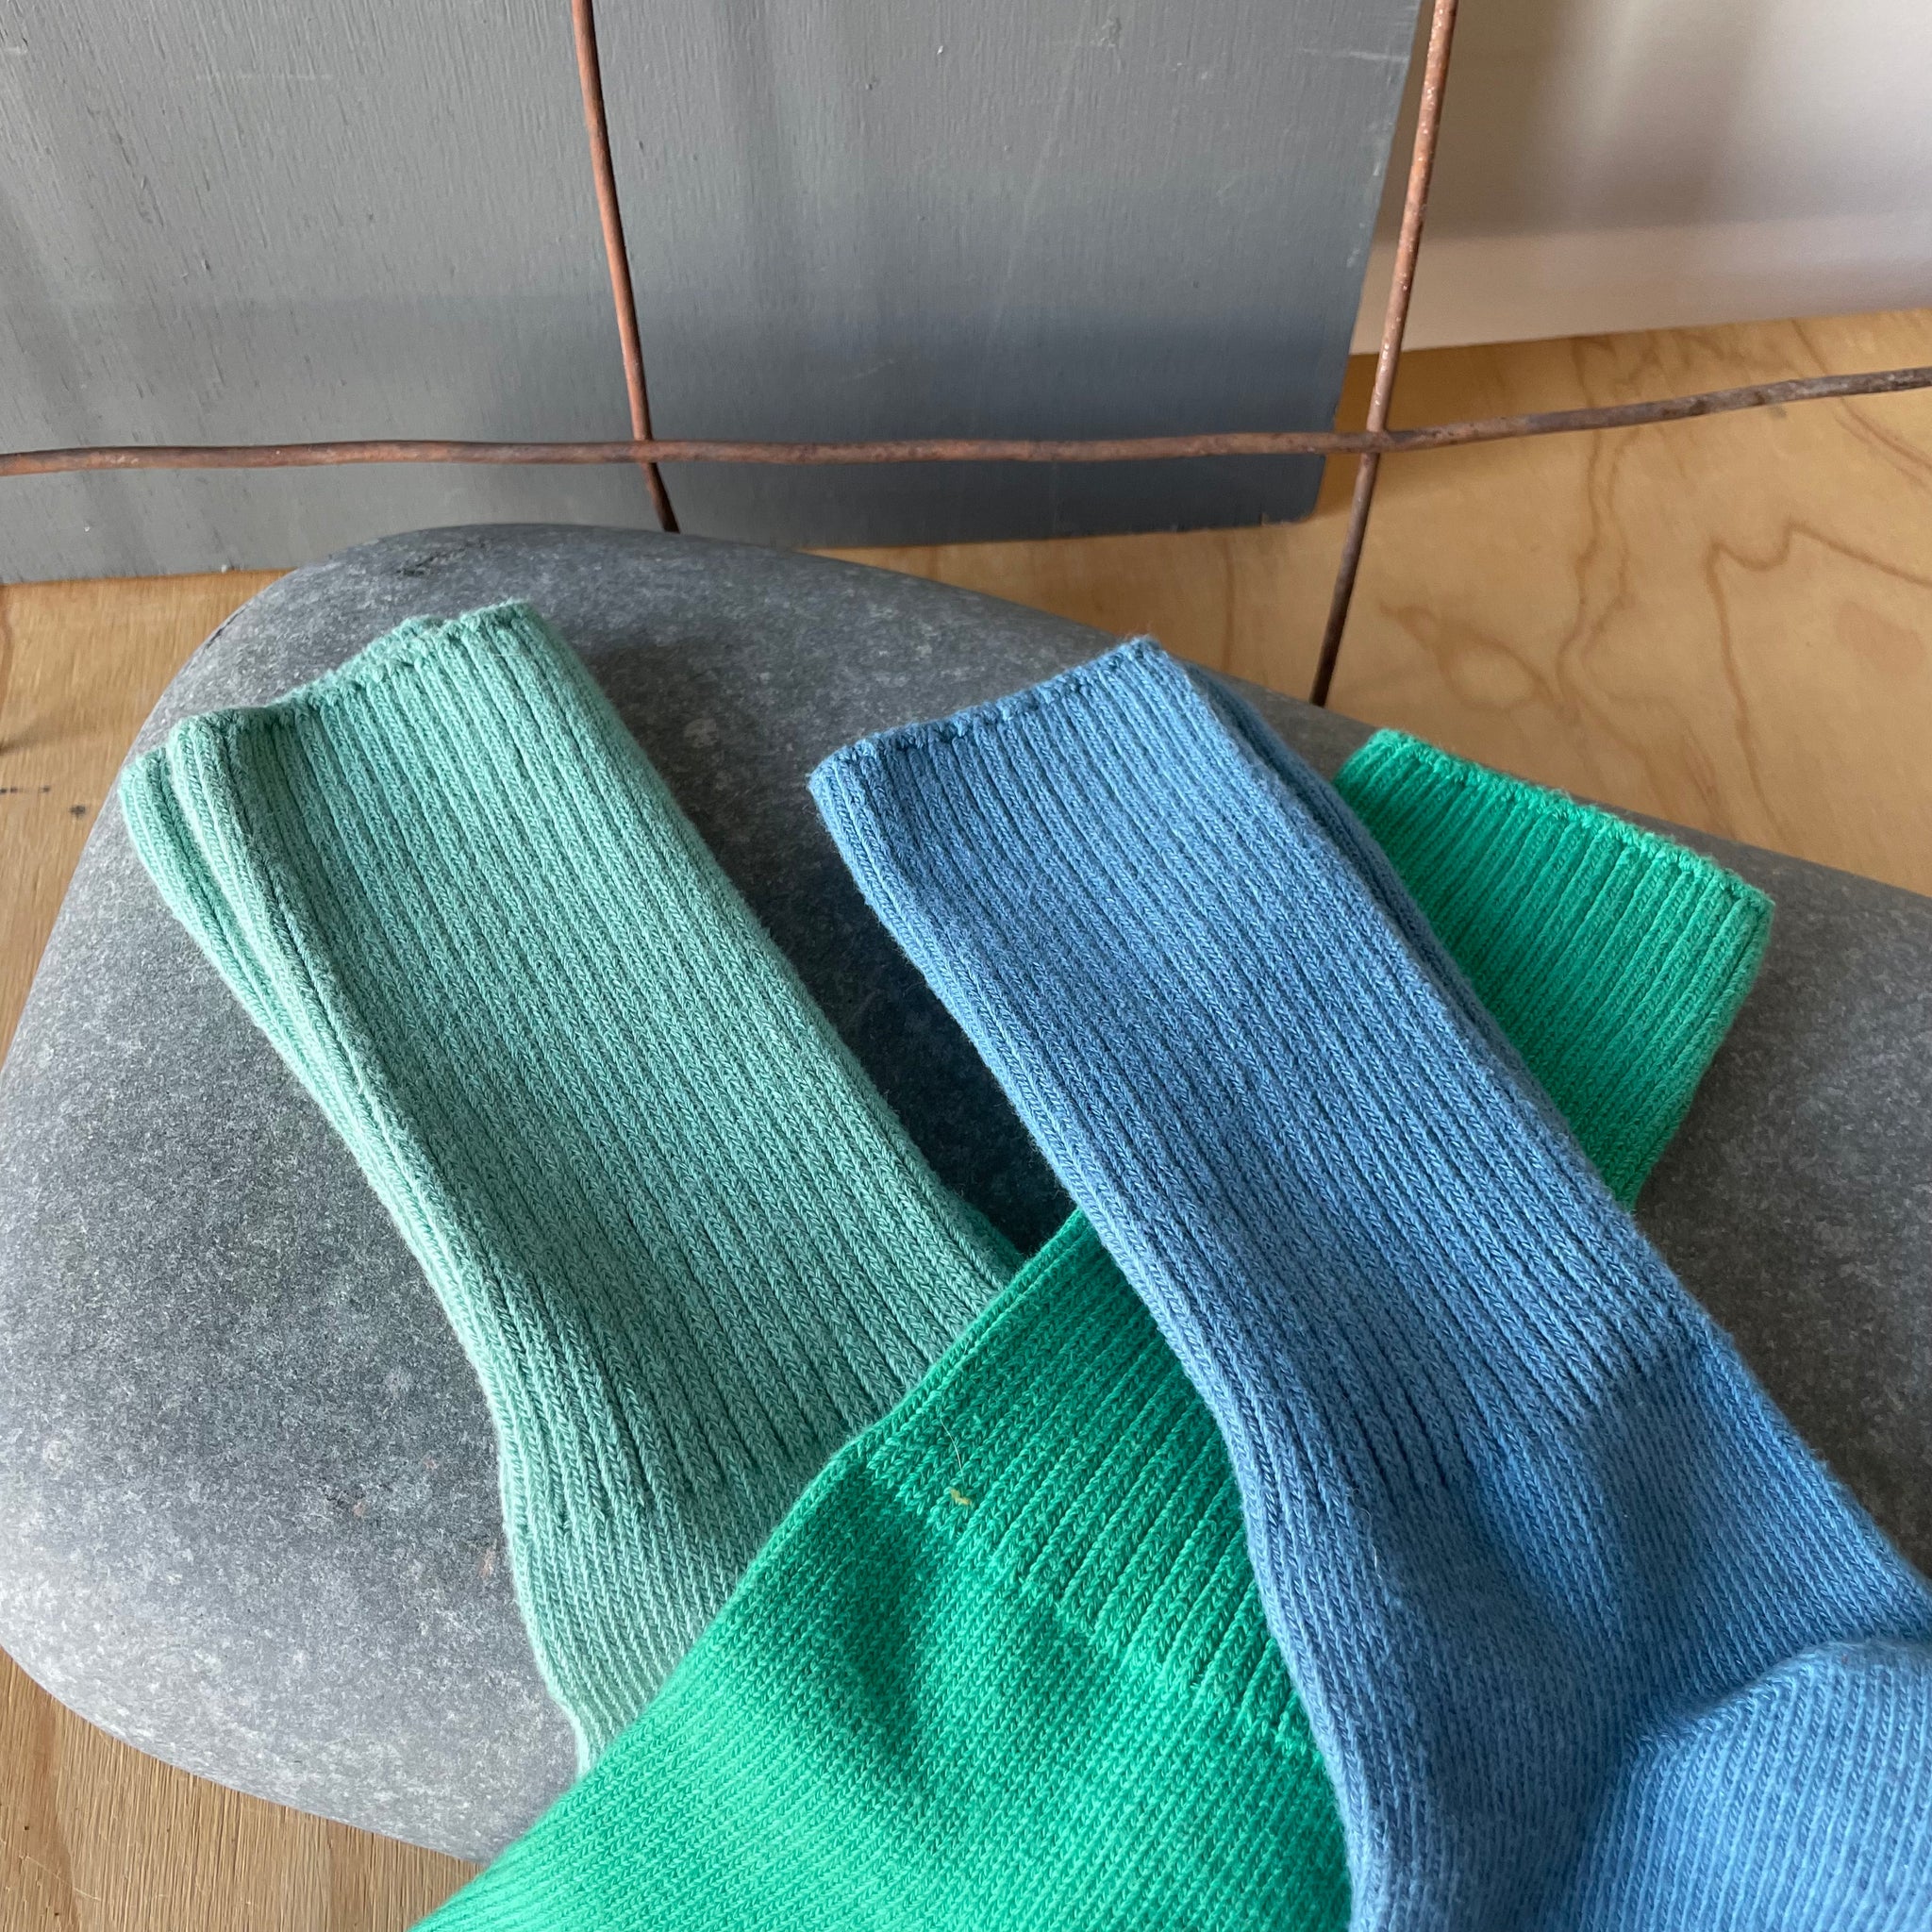 Hand Dyed Cotton Socks in Cool Tones by Scarfshop